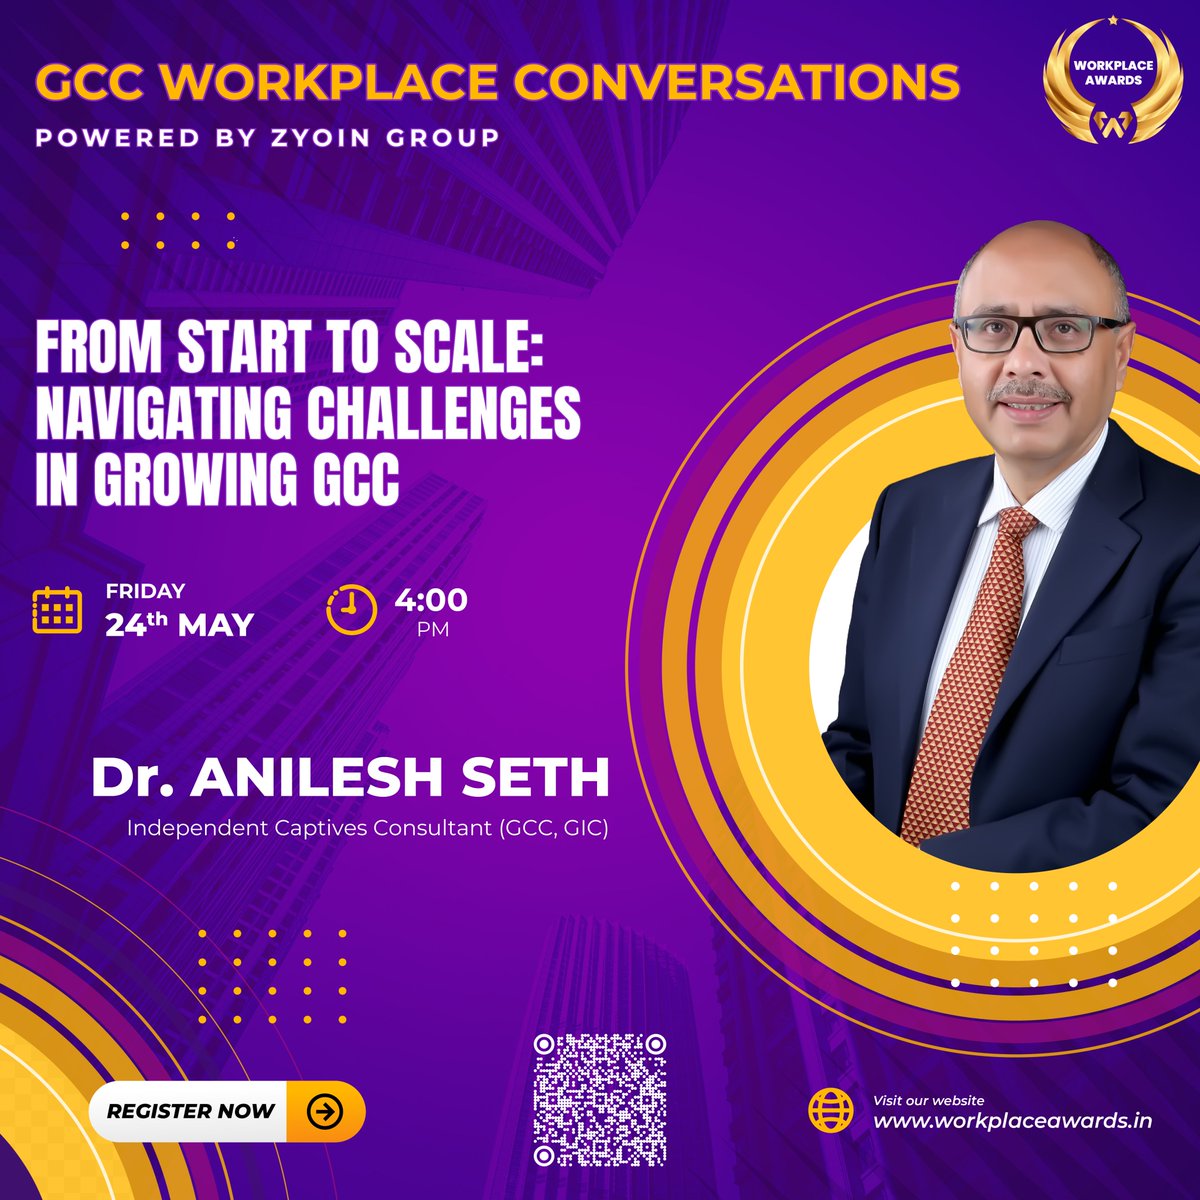 Introducing Dr. Anilesh Seth, our first speaker for the upcoming Workplace Conversation webinar on 'From Start to Scale: Navigating Challenges in Growing GCCs.'

Don't miss his insights at our webinar! 
Register now: us02web.zoom.us/webinar/regist…

#WorkplaceConversations